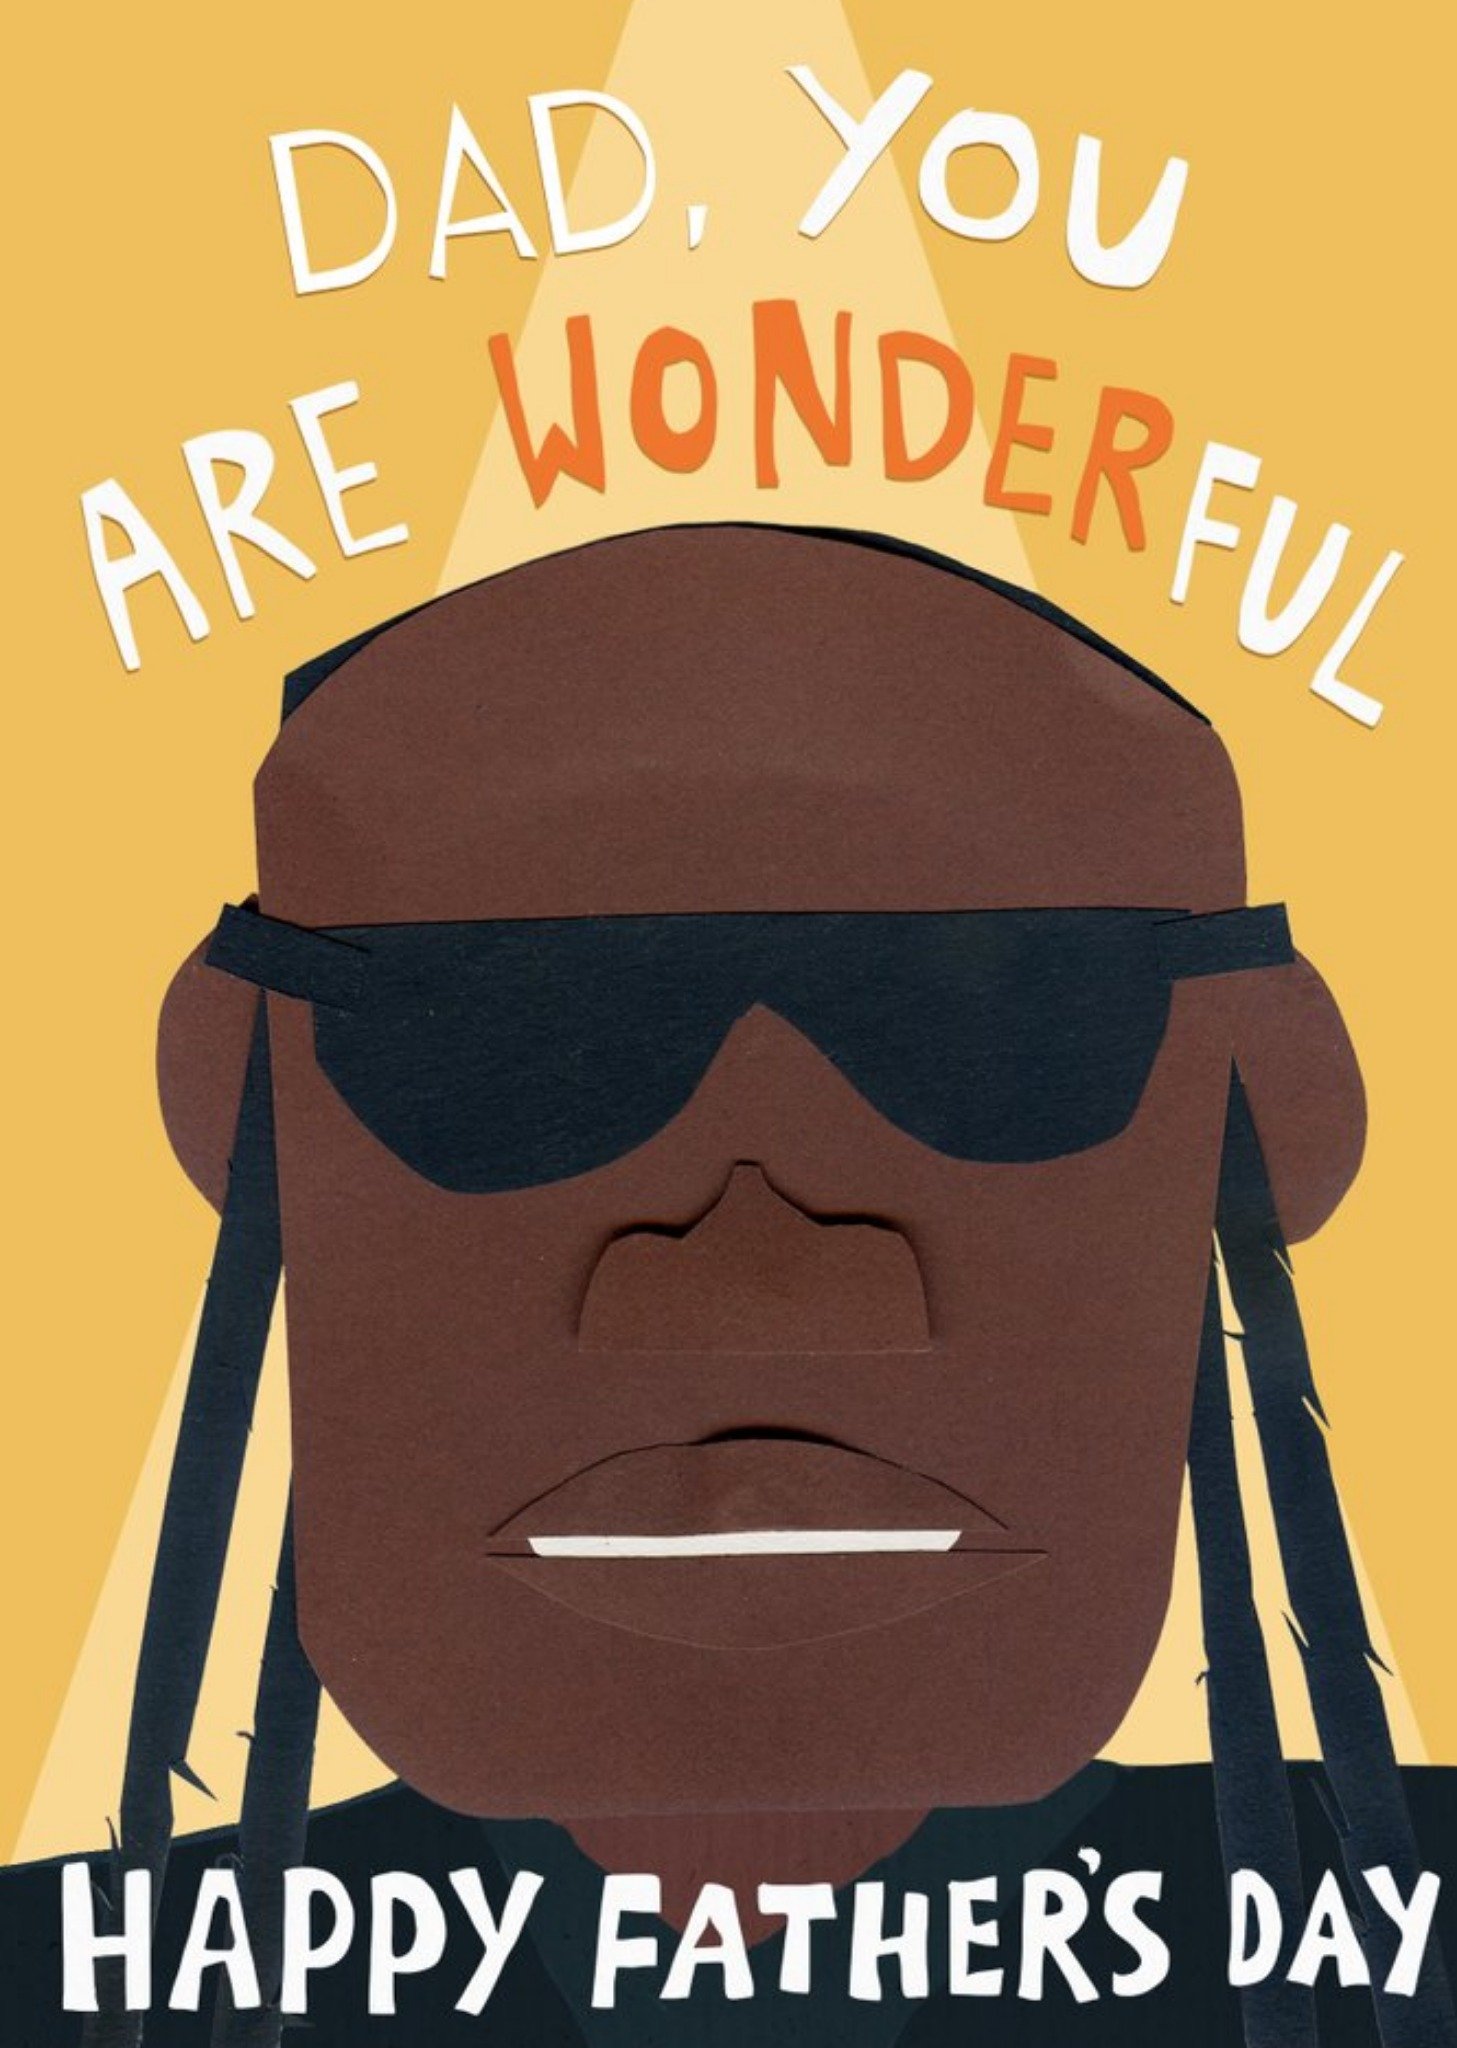 Moonpig Stevie Wonder Dad You Are Wonderful Happy Father's Day Card Ecard